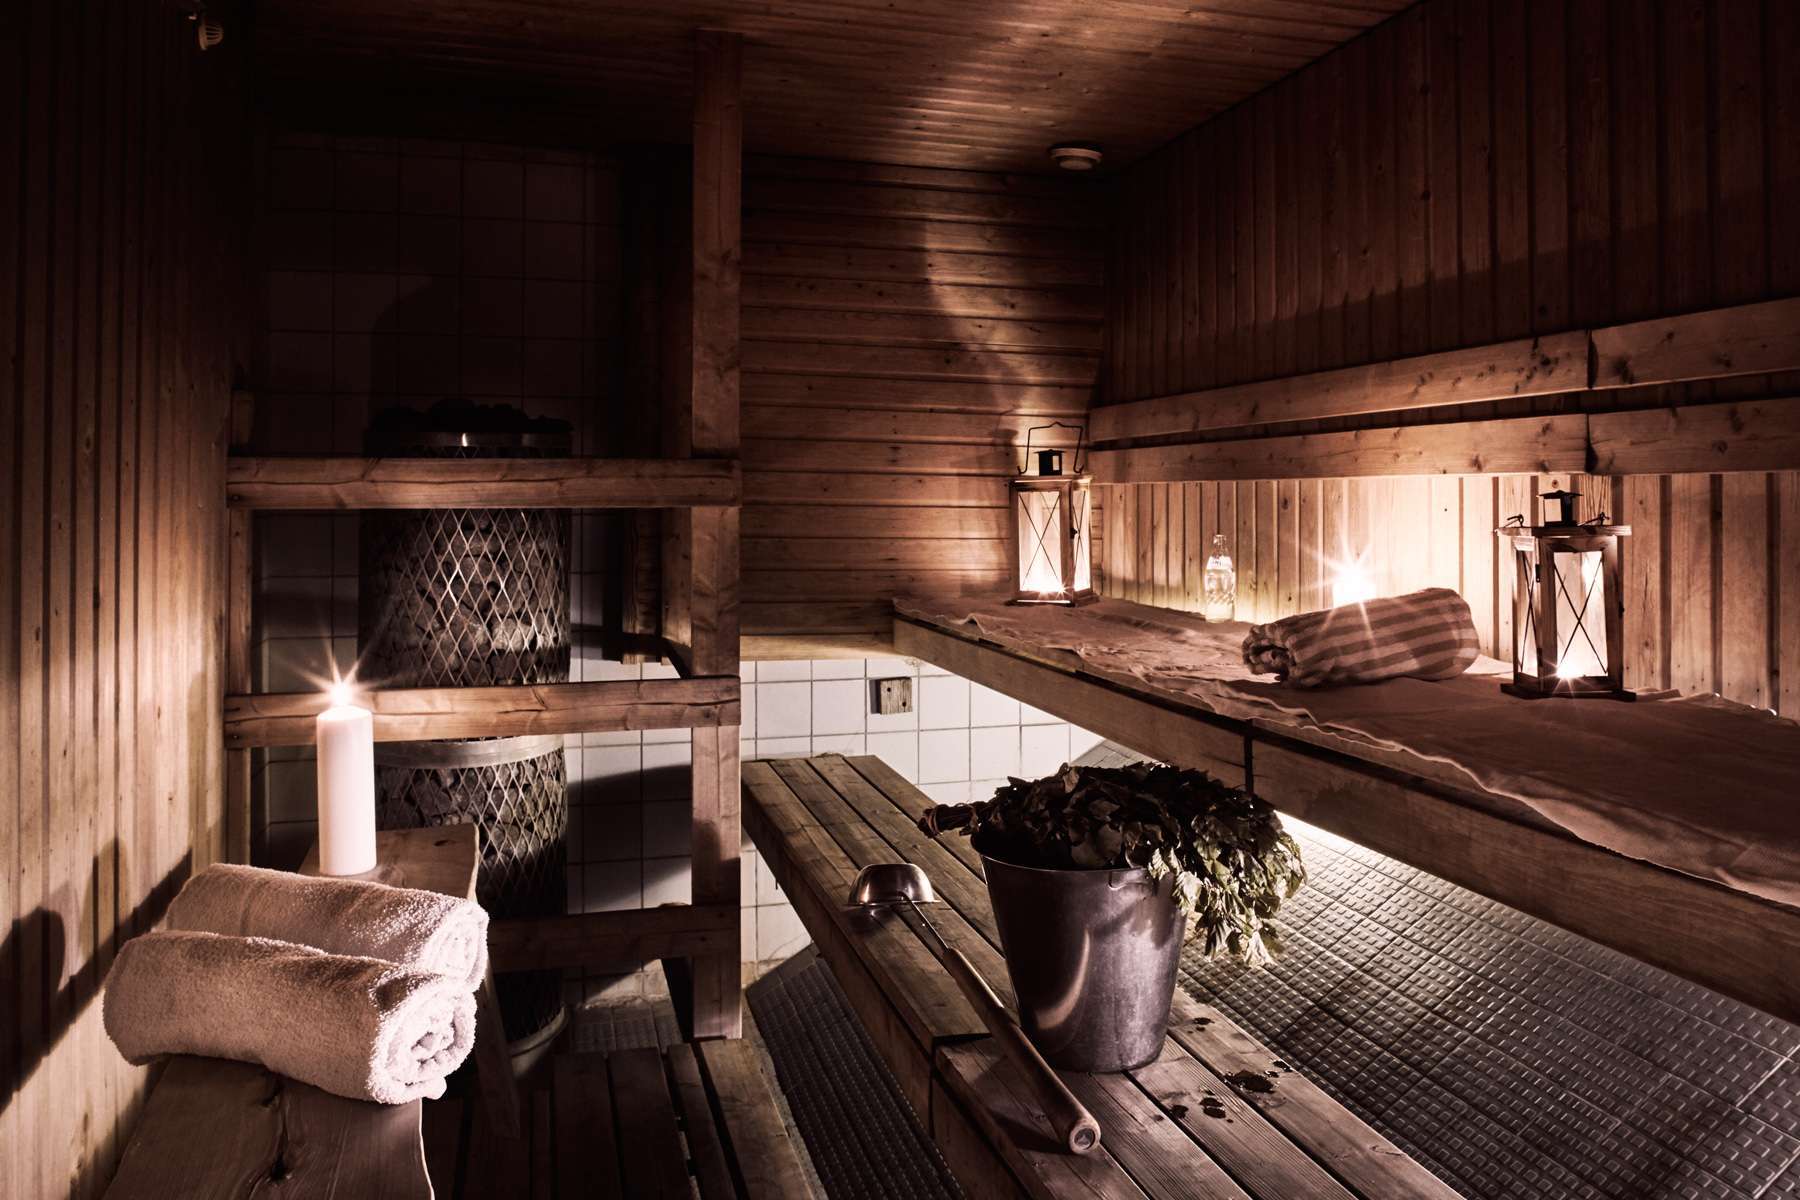 A traditional wooden Finnish sauna with candles